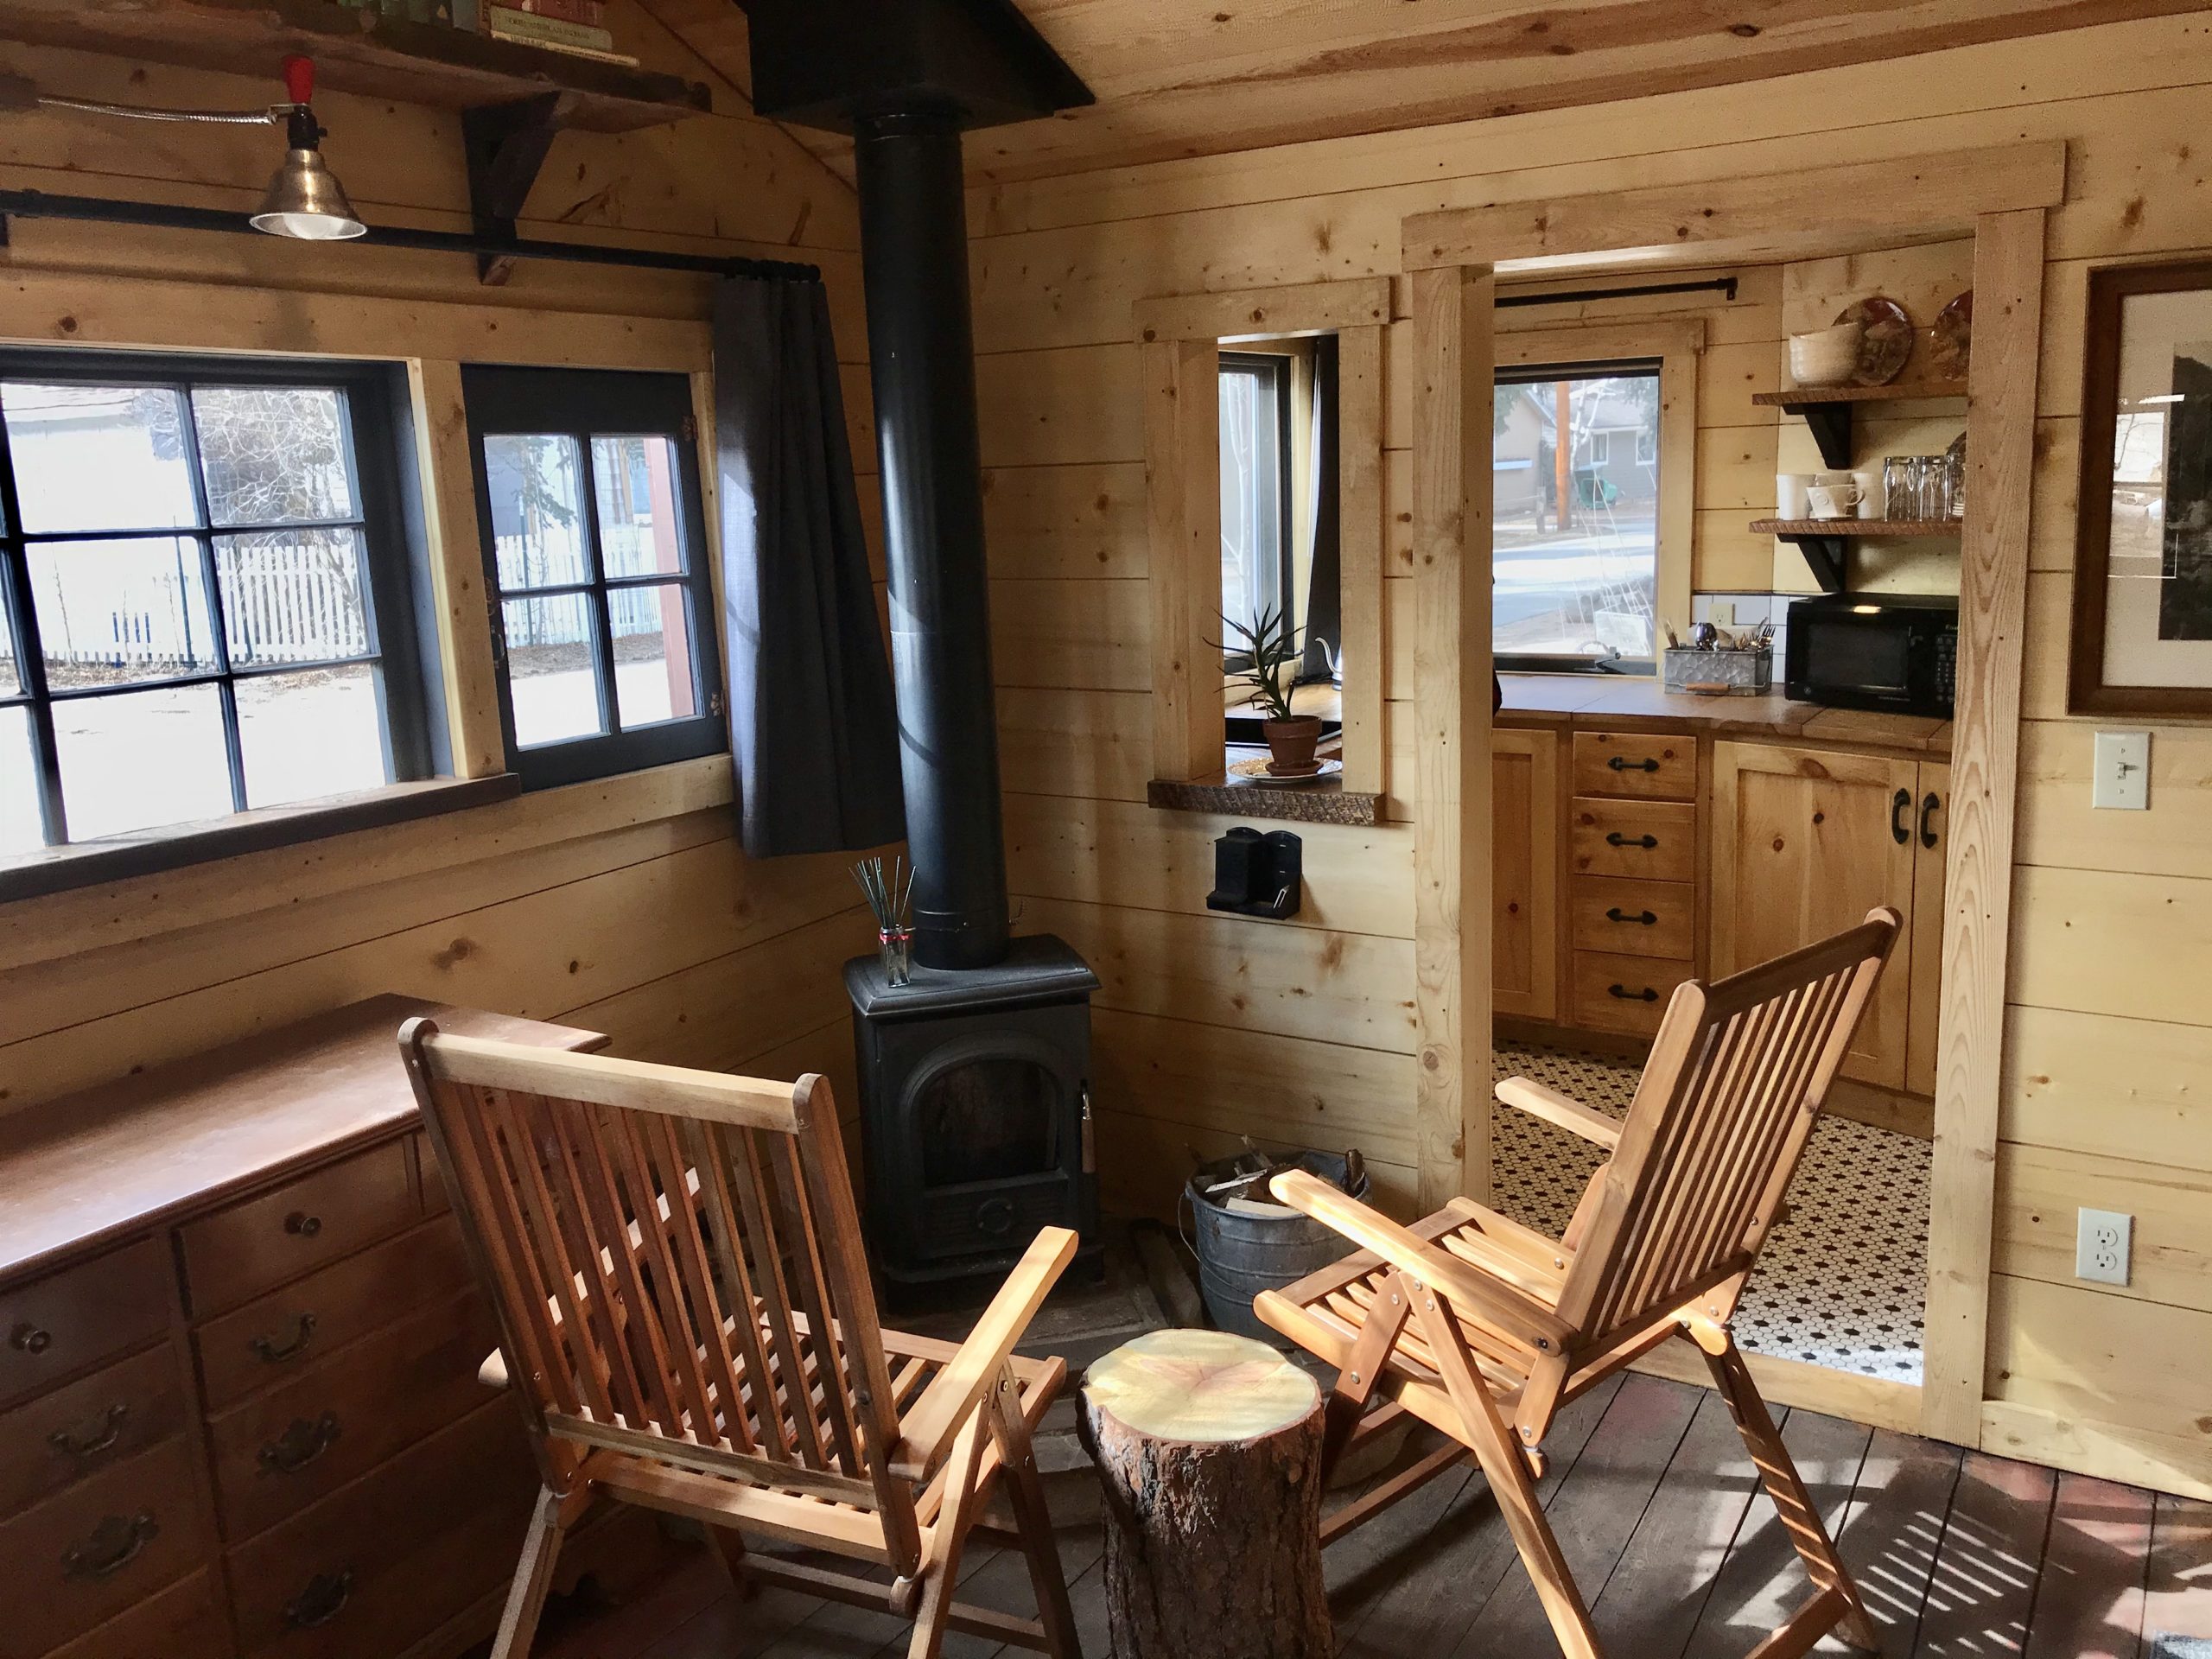 Reflection Cabin is an extraordinary vacation rental cabin near RMNP in Estes Park CO US. This is an image of its front room. with fireplace